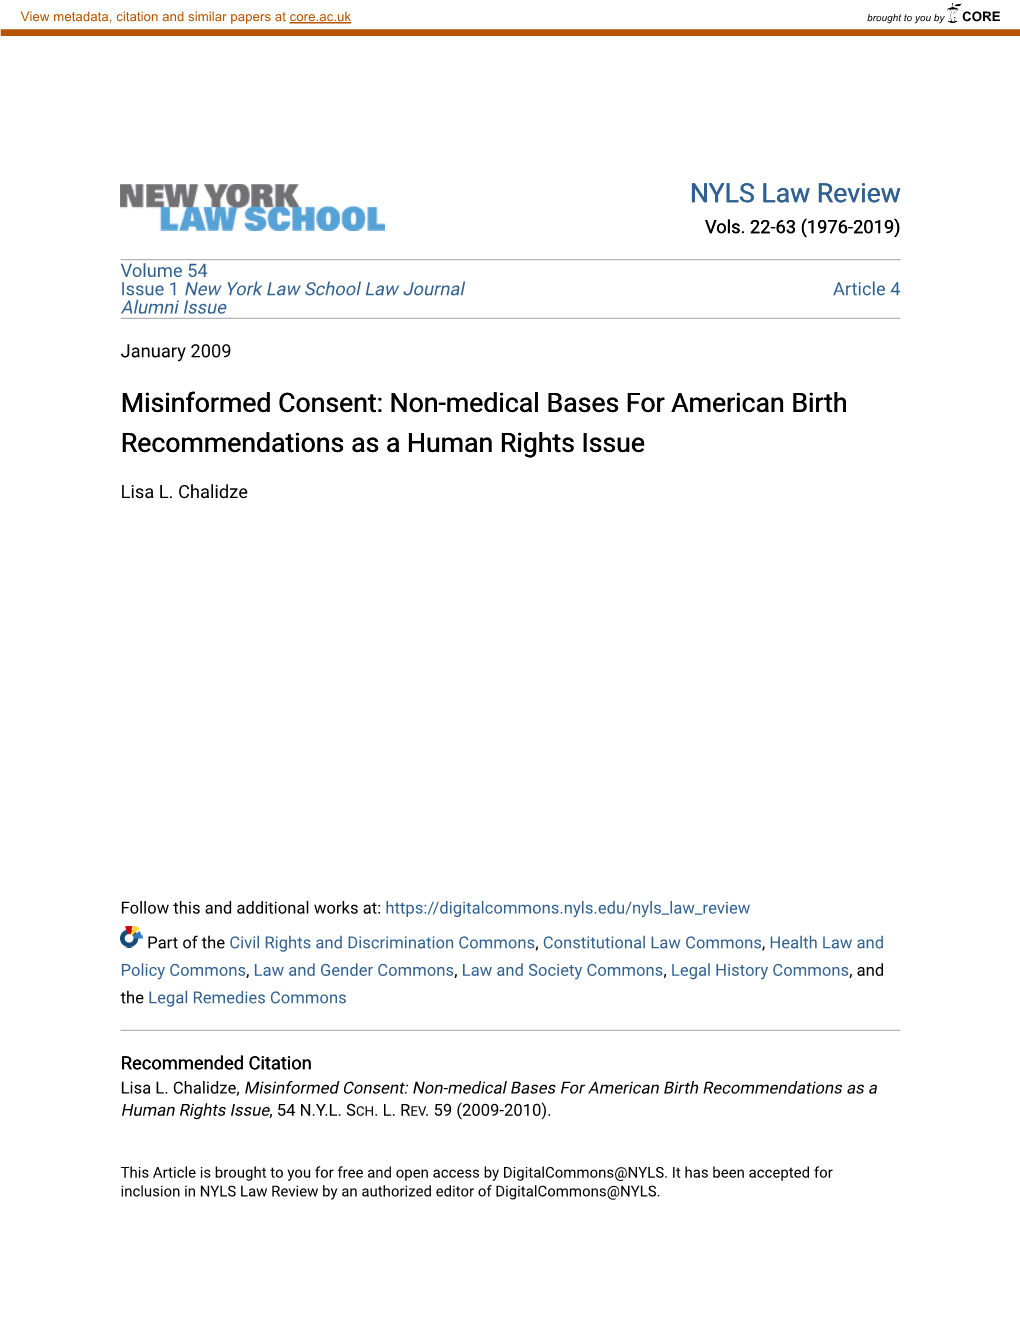 Non-Medical Bases for American Birth Recommendations As a Human Rights Issue